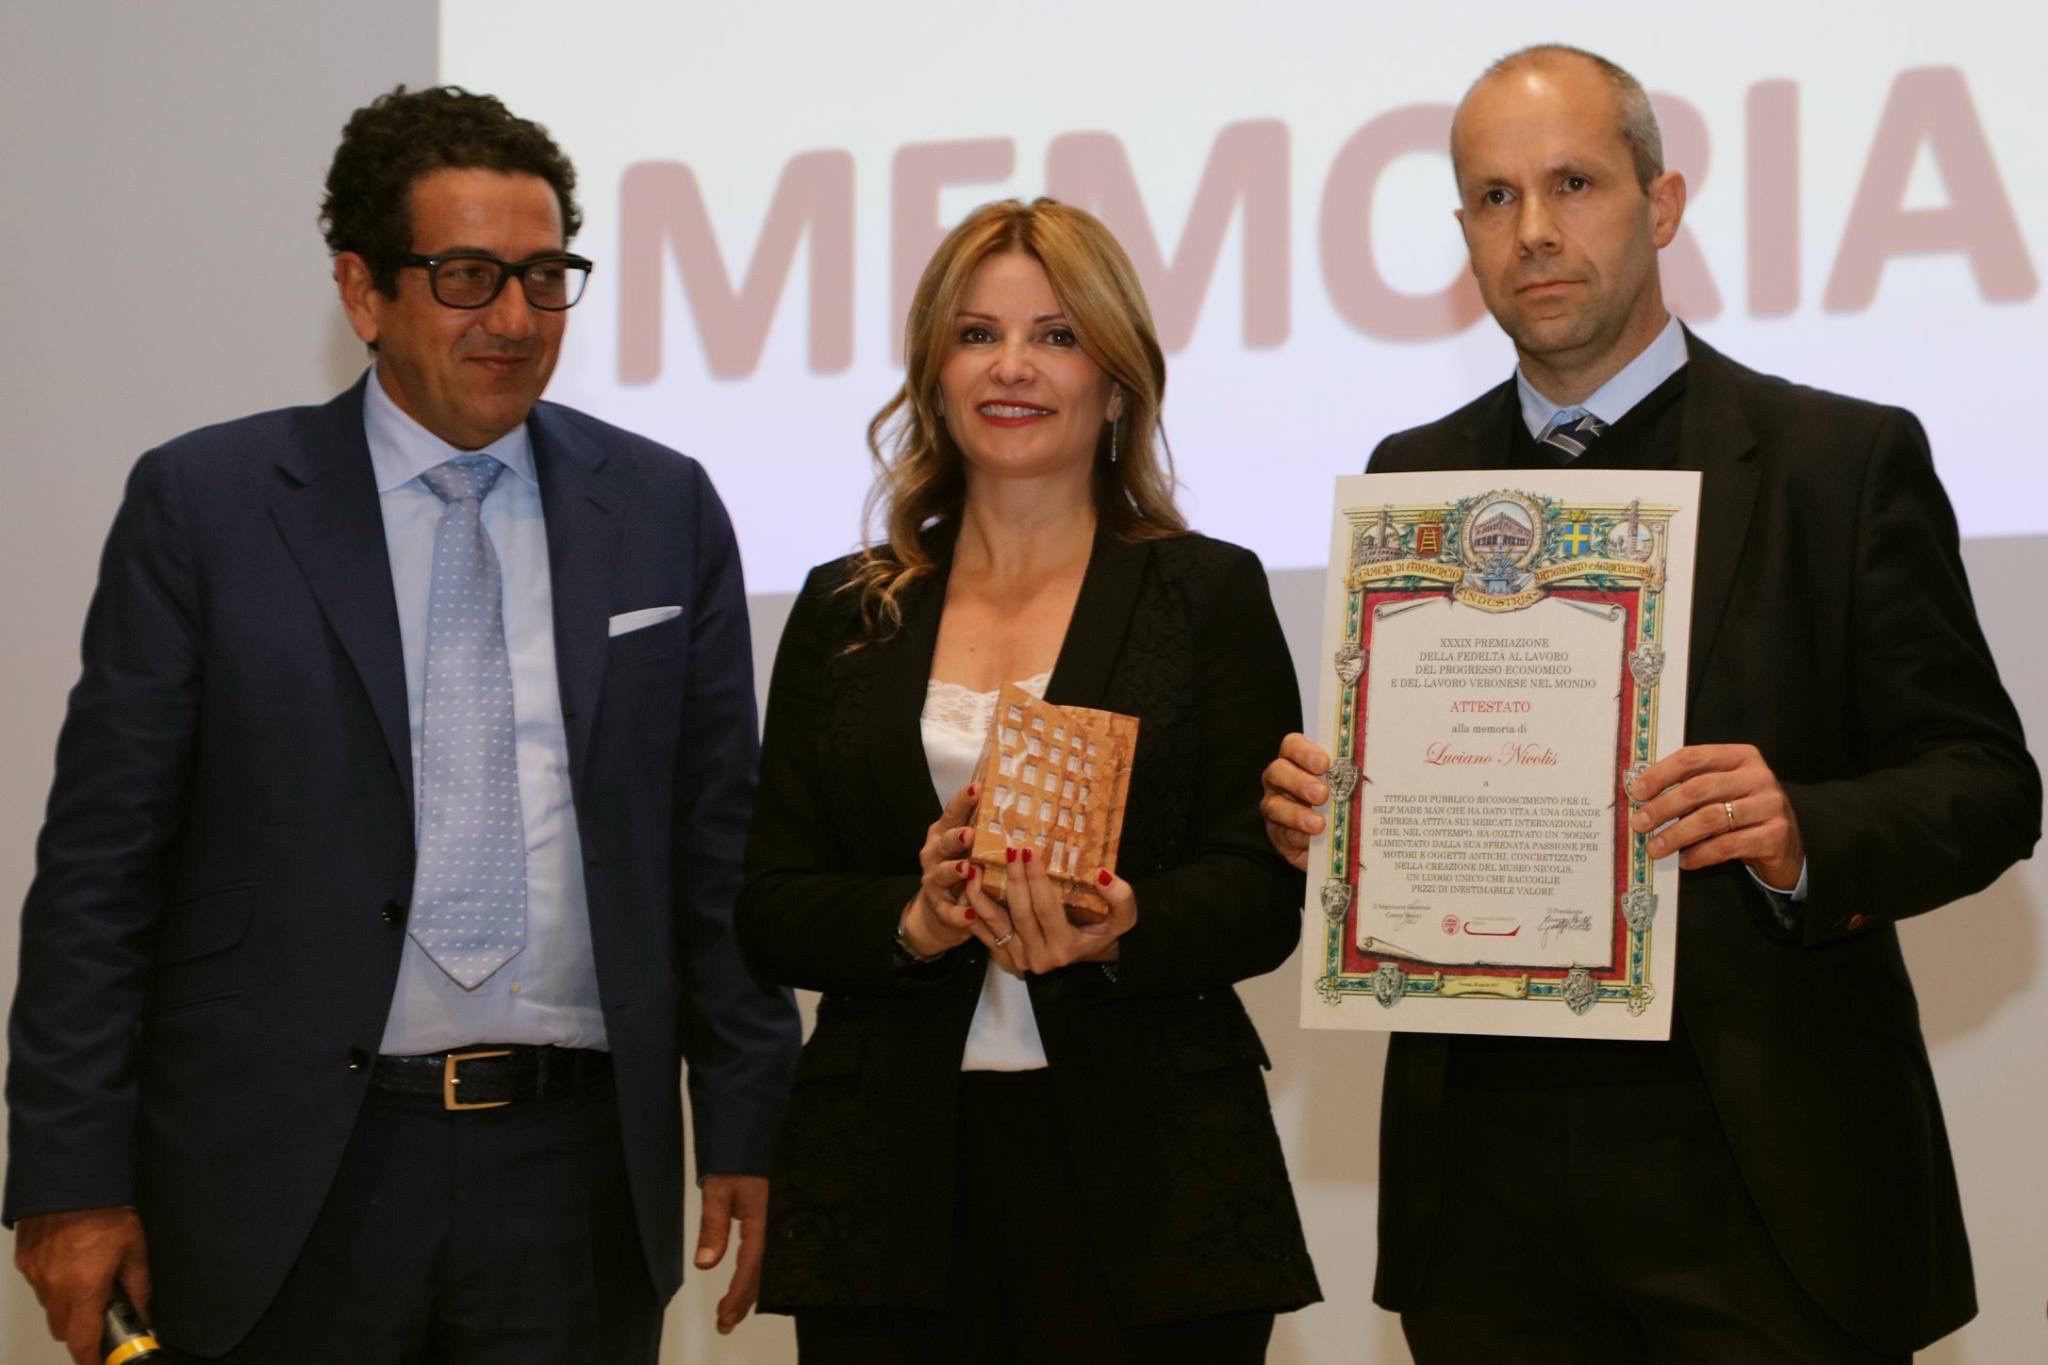 Award “Loyalty to work” to the memory of Luciano Nicolis.